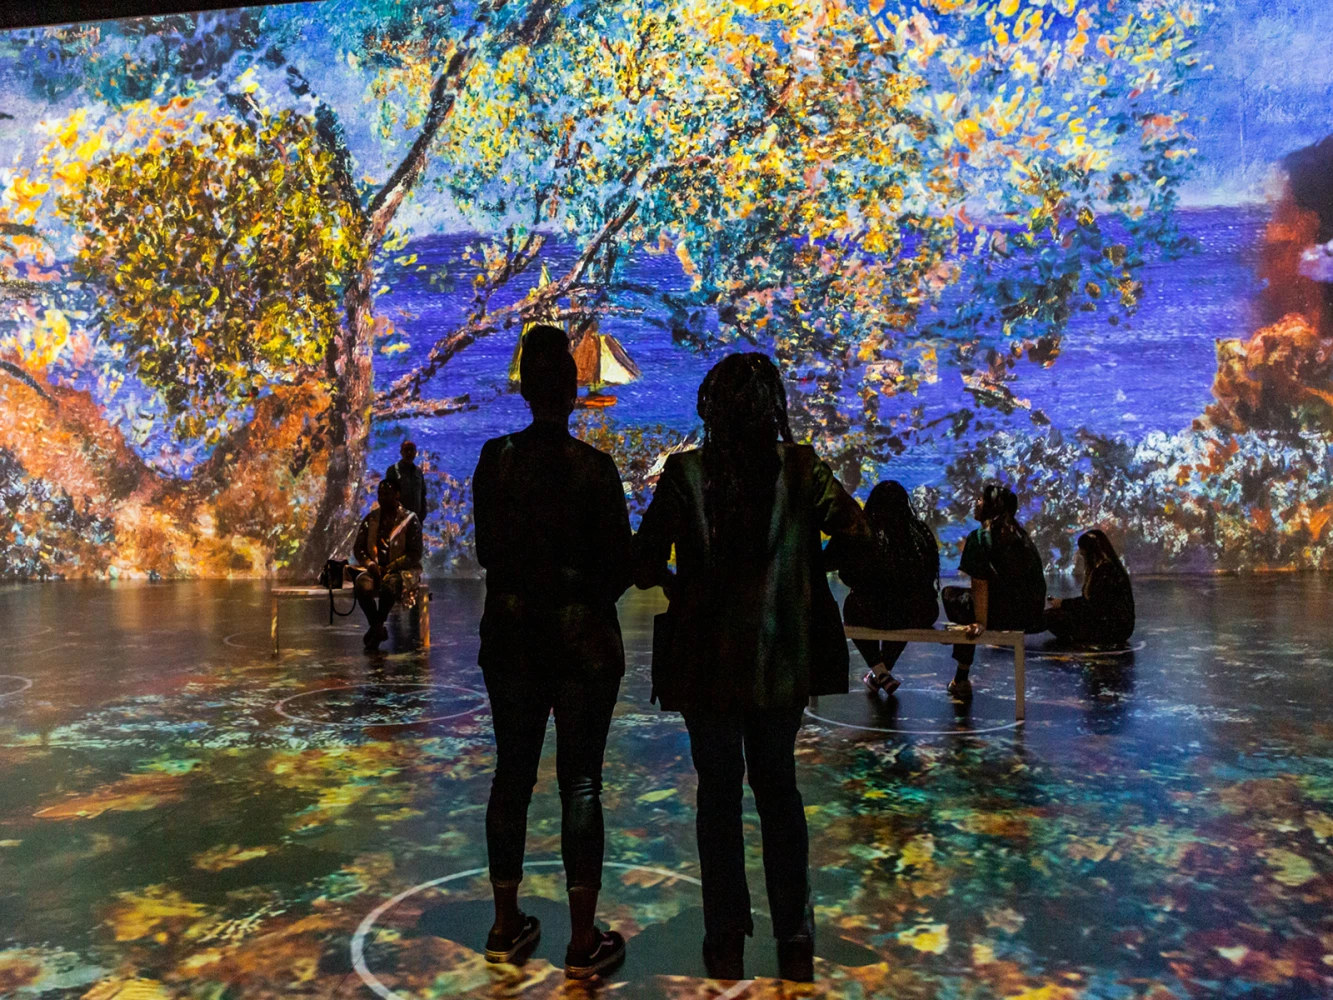 Immersive Monet & The Impressionists + Immersive Van Gogh: What to expect - 2